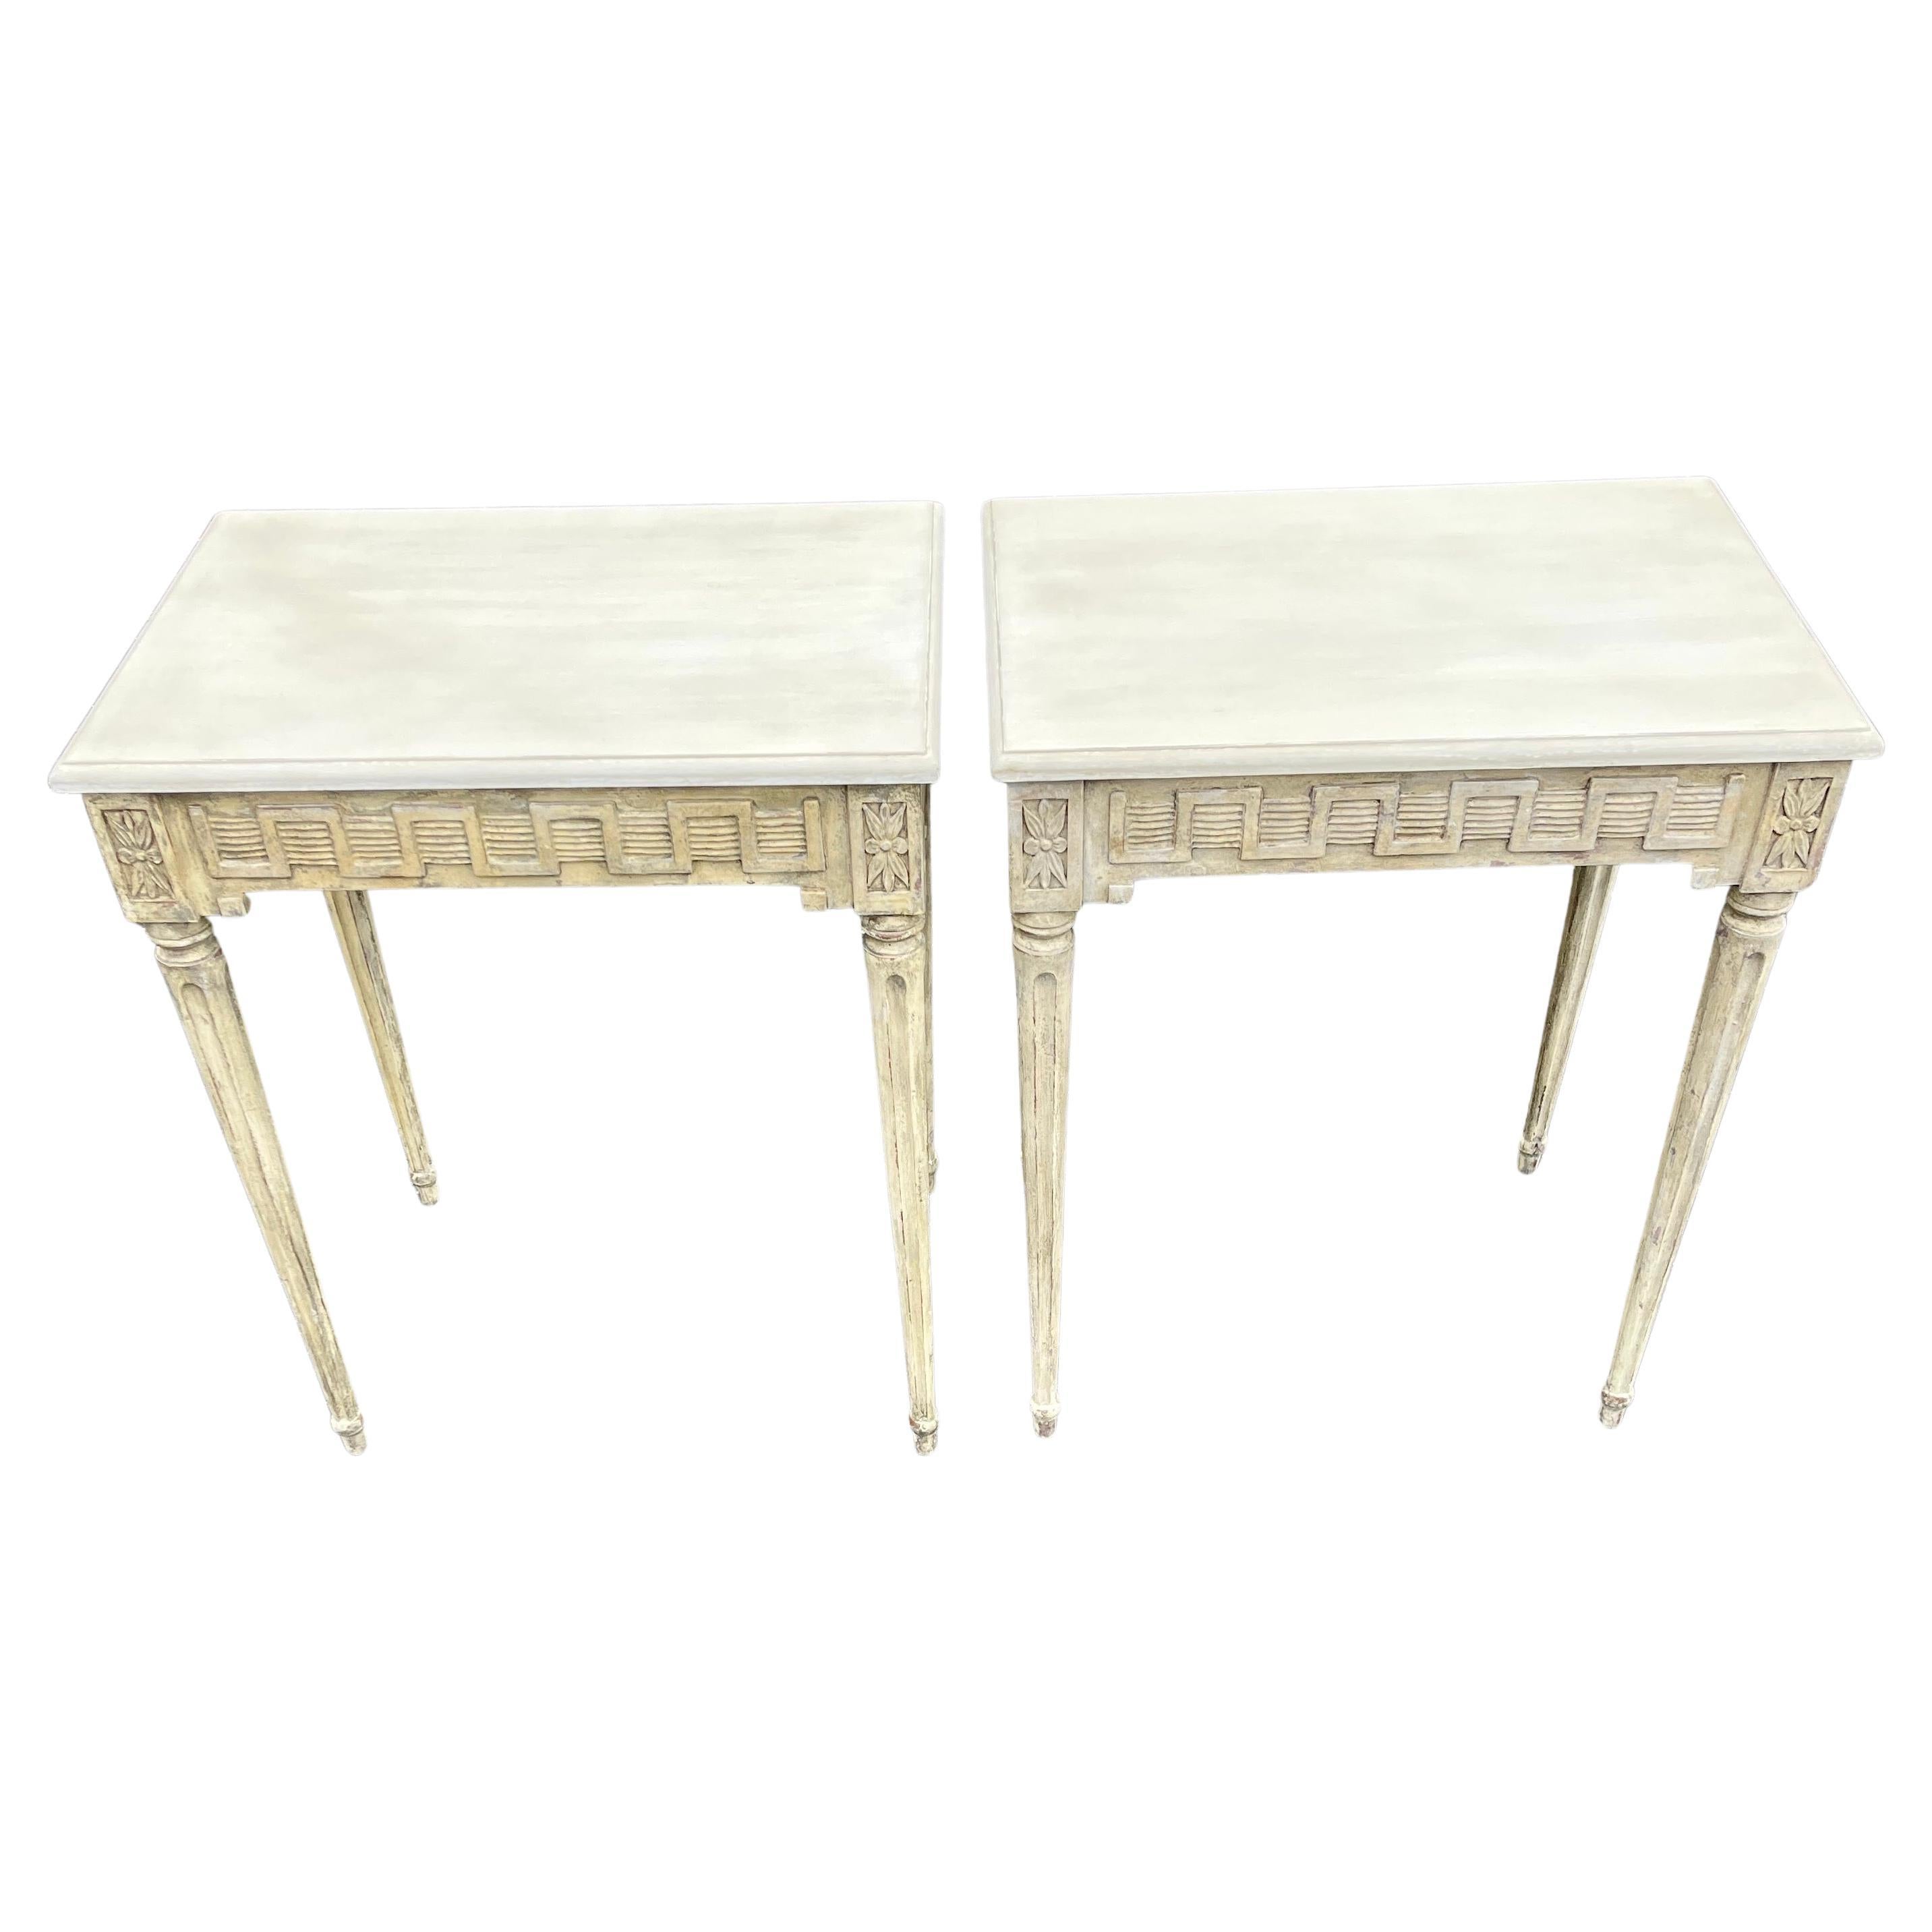 Gustavian Pair of Late 19th Century Painted Console Tables, Sweden 

These Swedish Gustavian painted pair of consoles feature hand carved bases and original patina. The tops have been beautifully refinished in warm tones of gray and cream. With